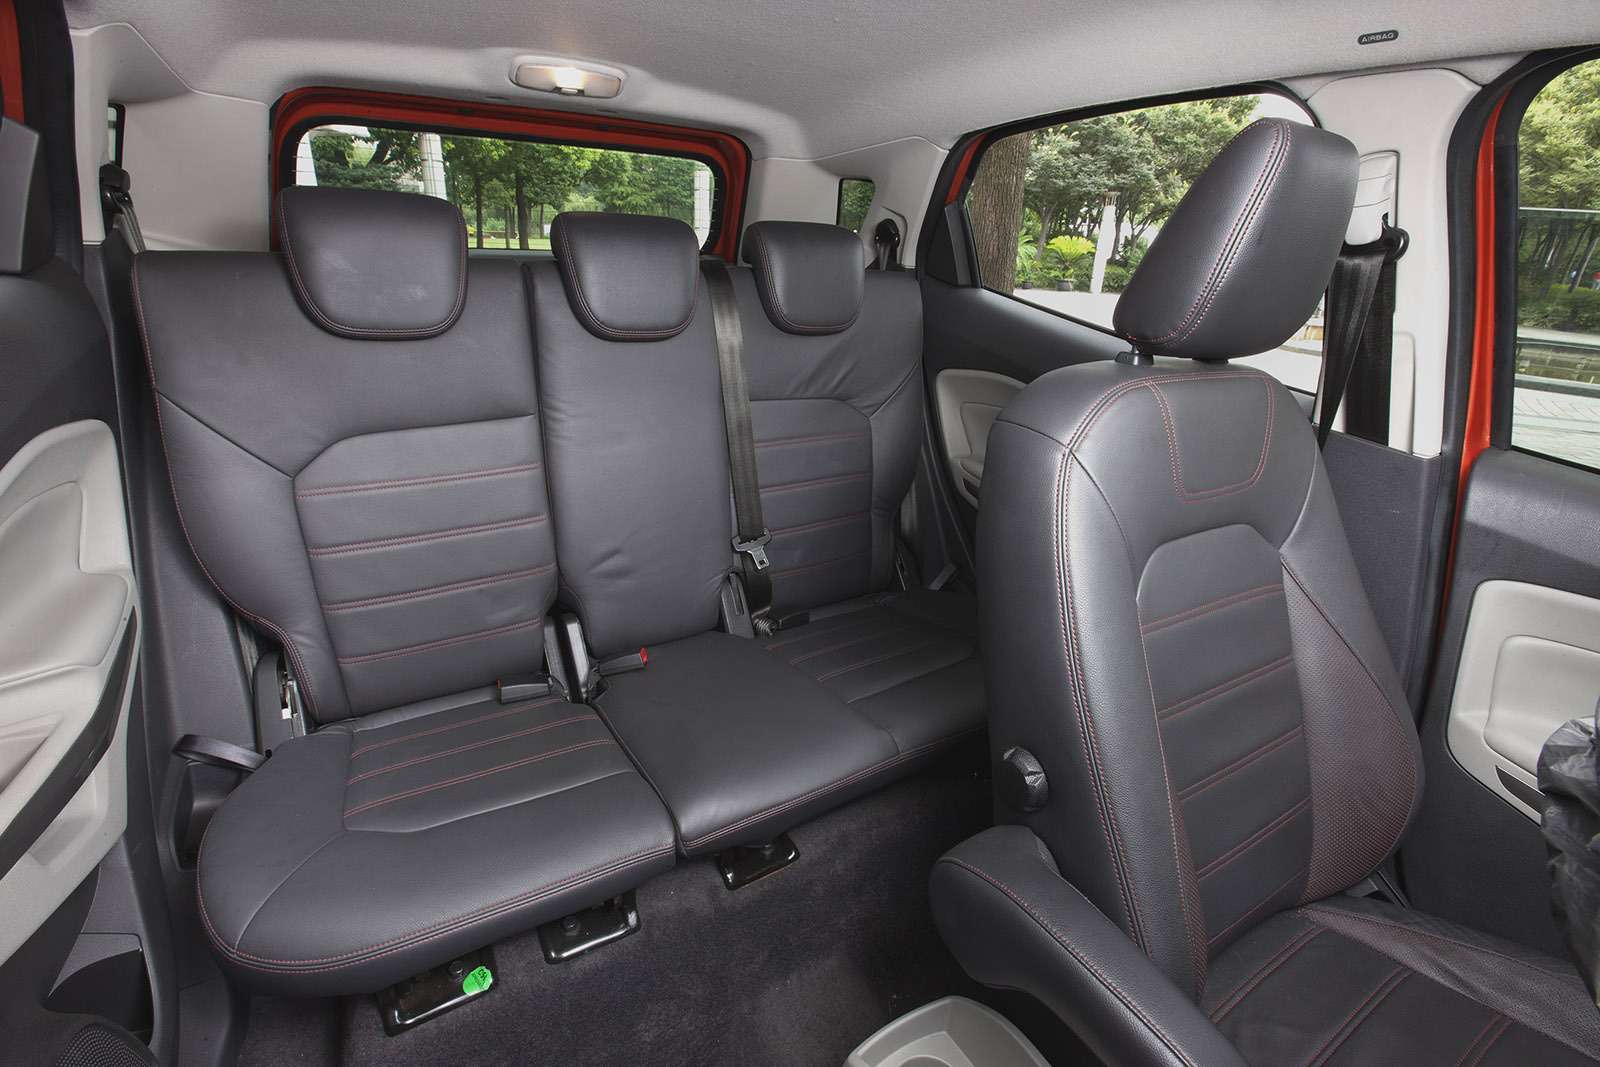 Ford_EcoSport_Seating_Rear_Space